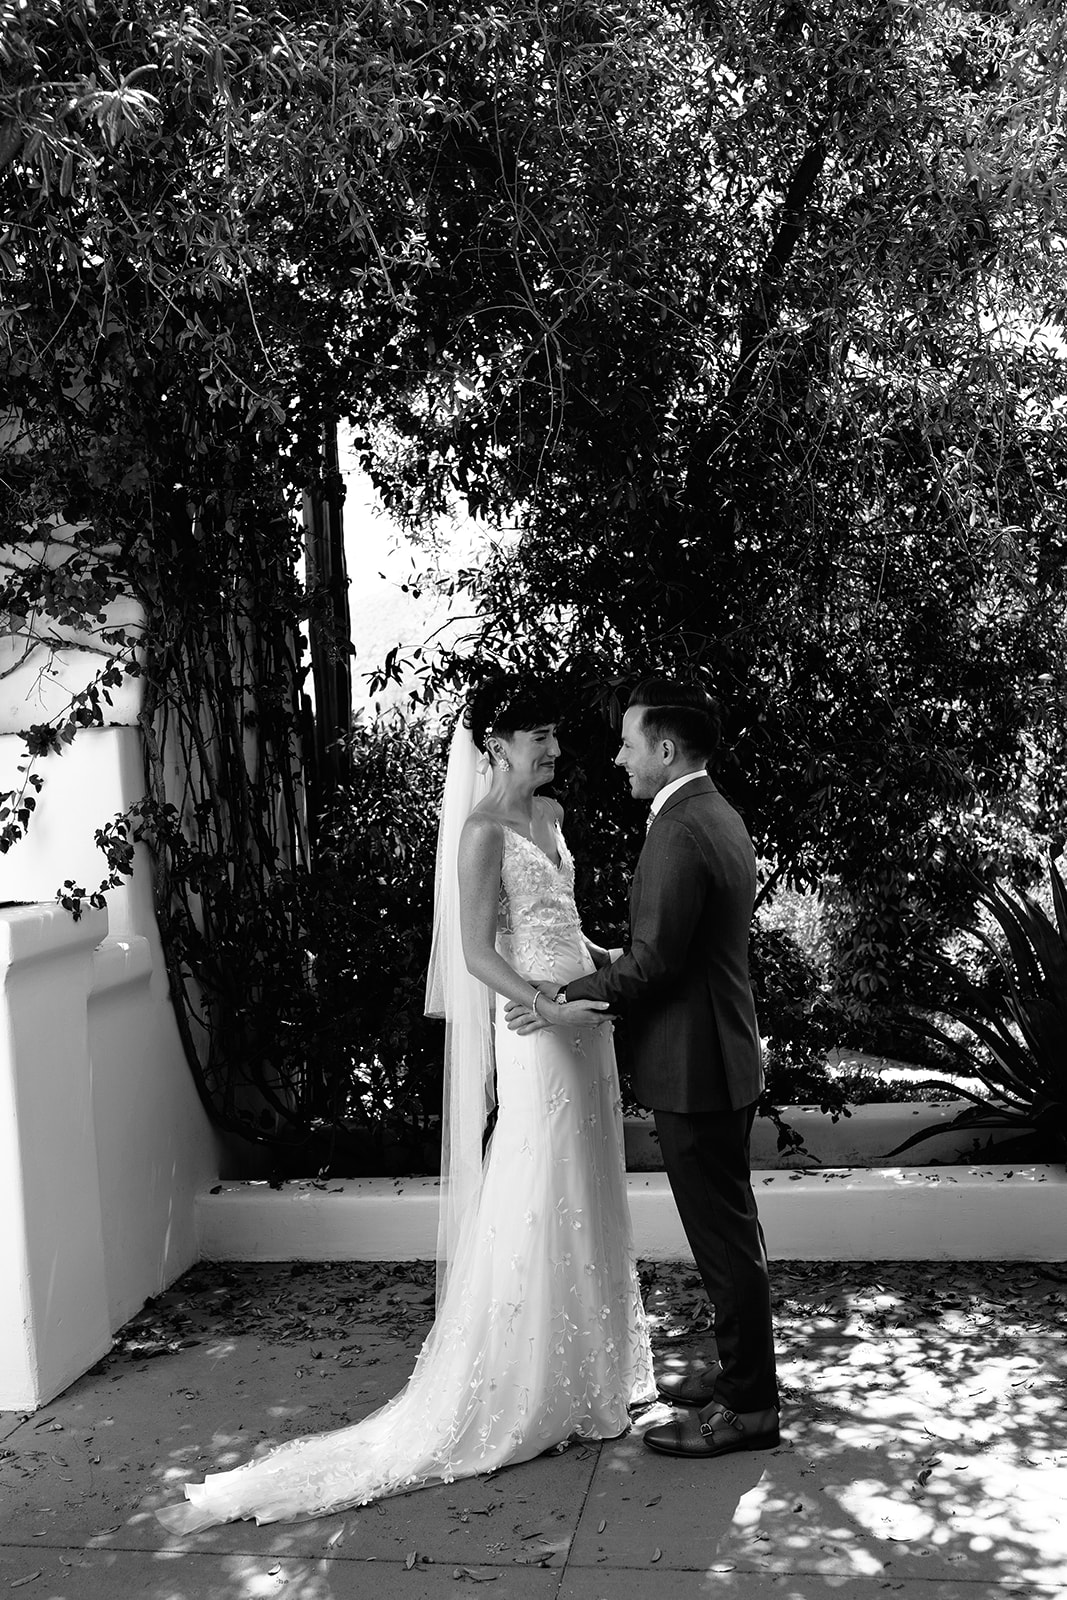 A black and white photo of a bride and groom standing apart, outdoors, with the groom looking at the bride as she walks away as they have their first look at their garden party wedding